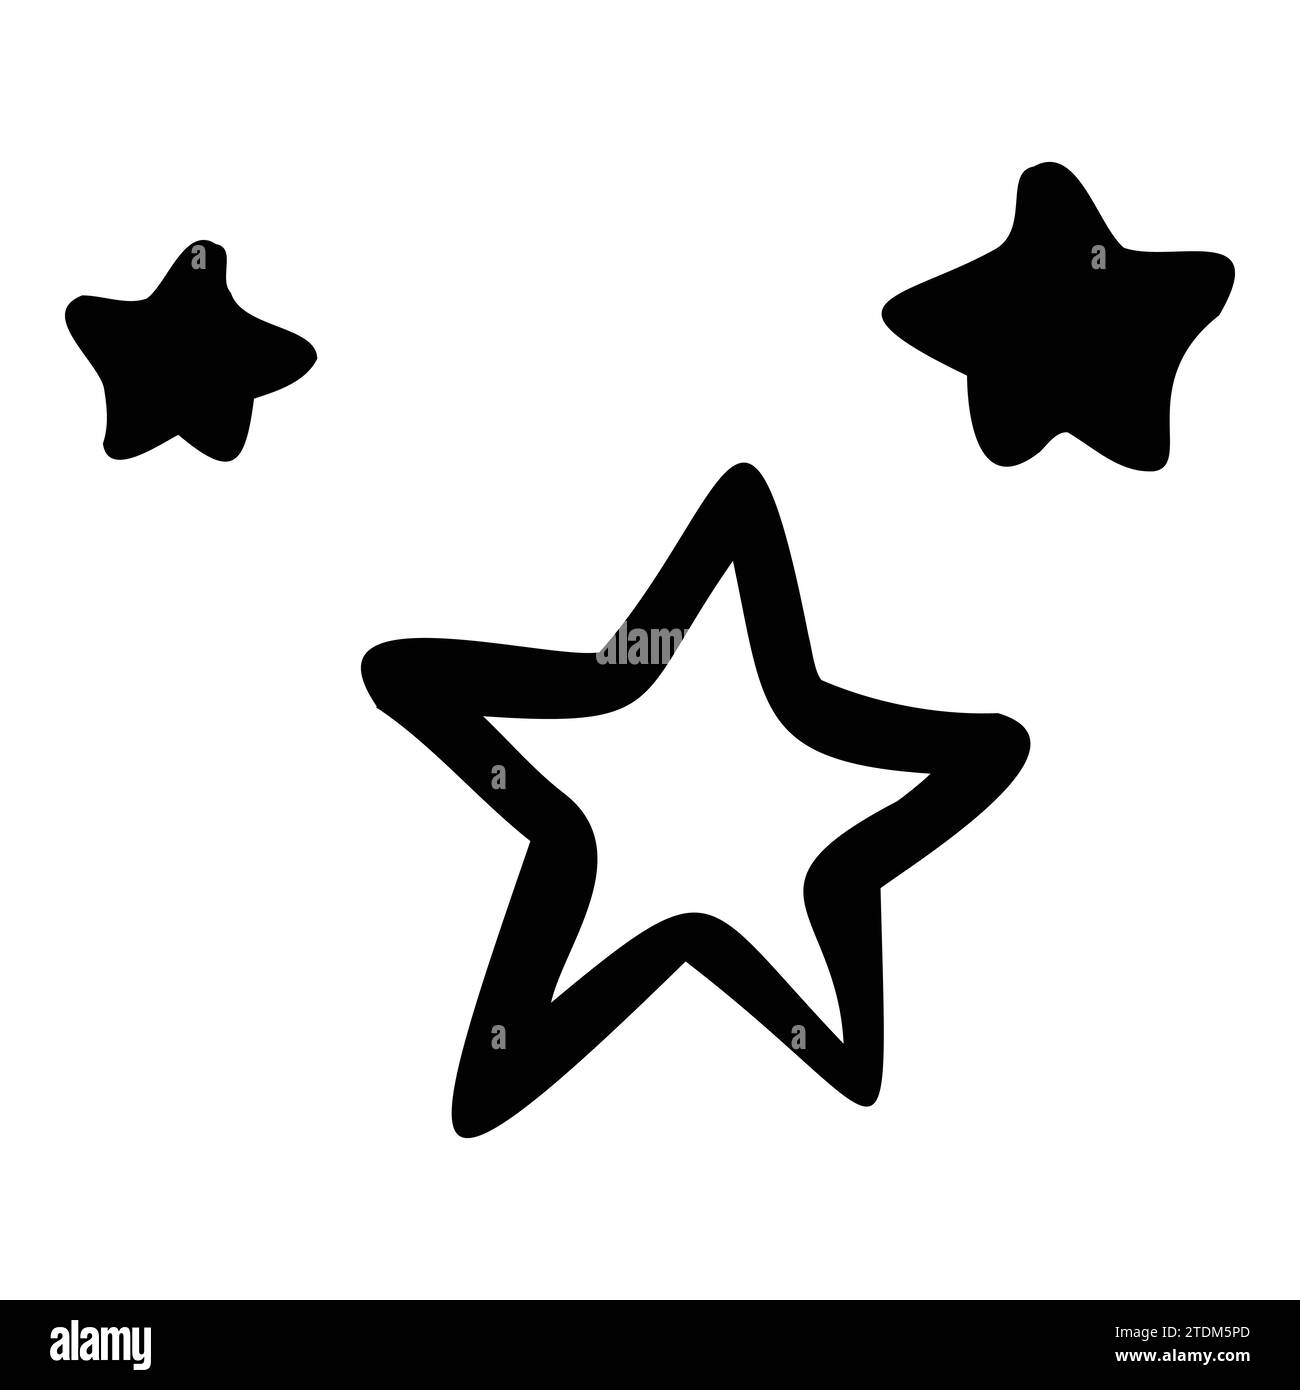 Vector of doodle stars. Hand drawn, doodle elements isolated on white background Stock Vector